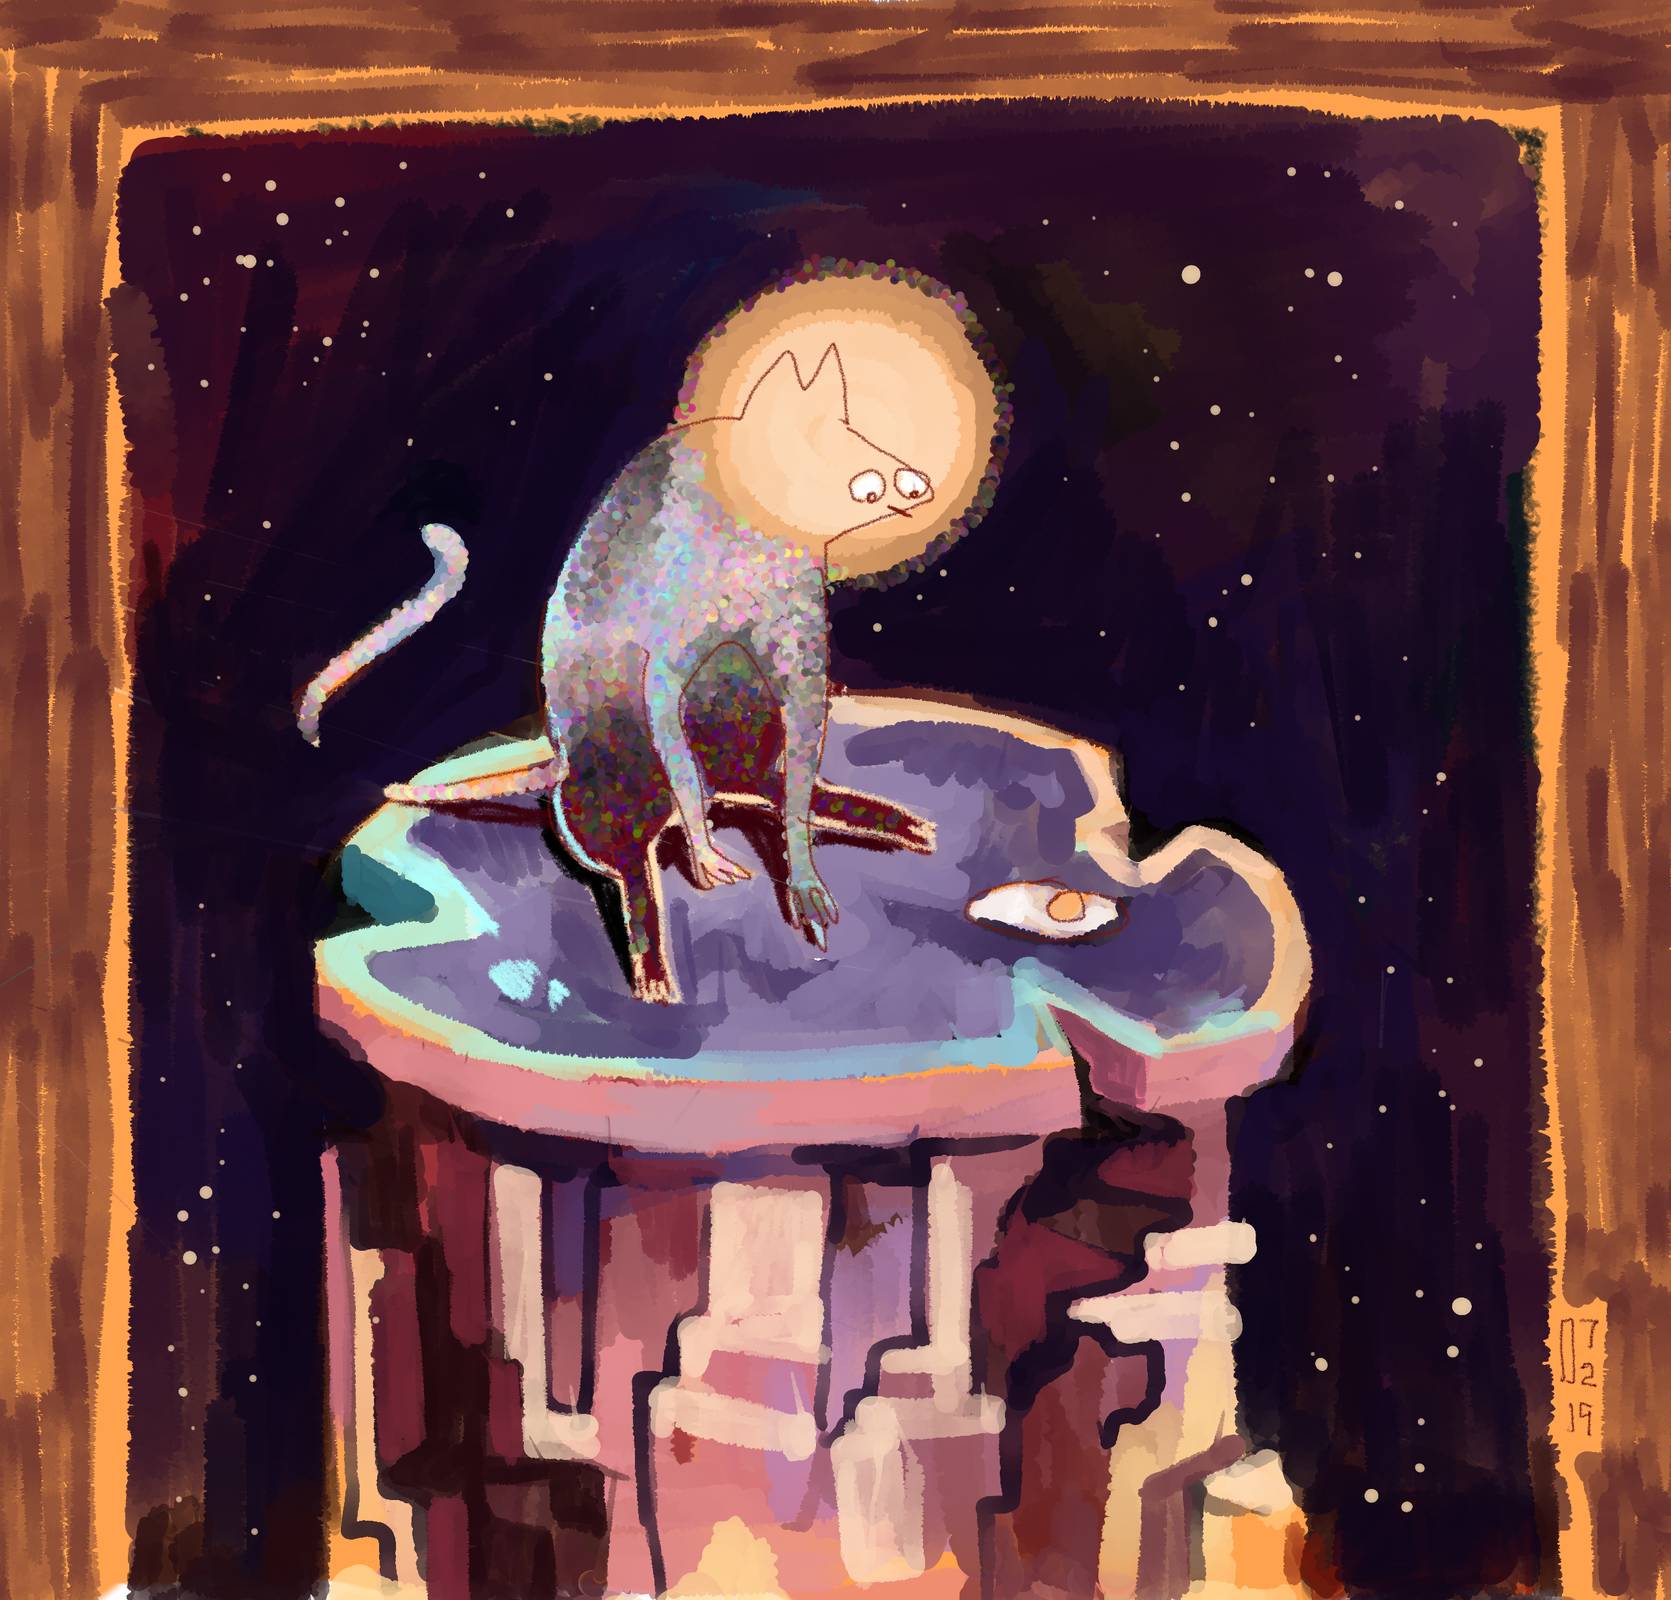 Funny little cat with a halo sits on top of a tower in the universe, staring at a fried egg